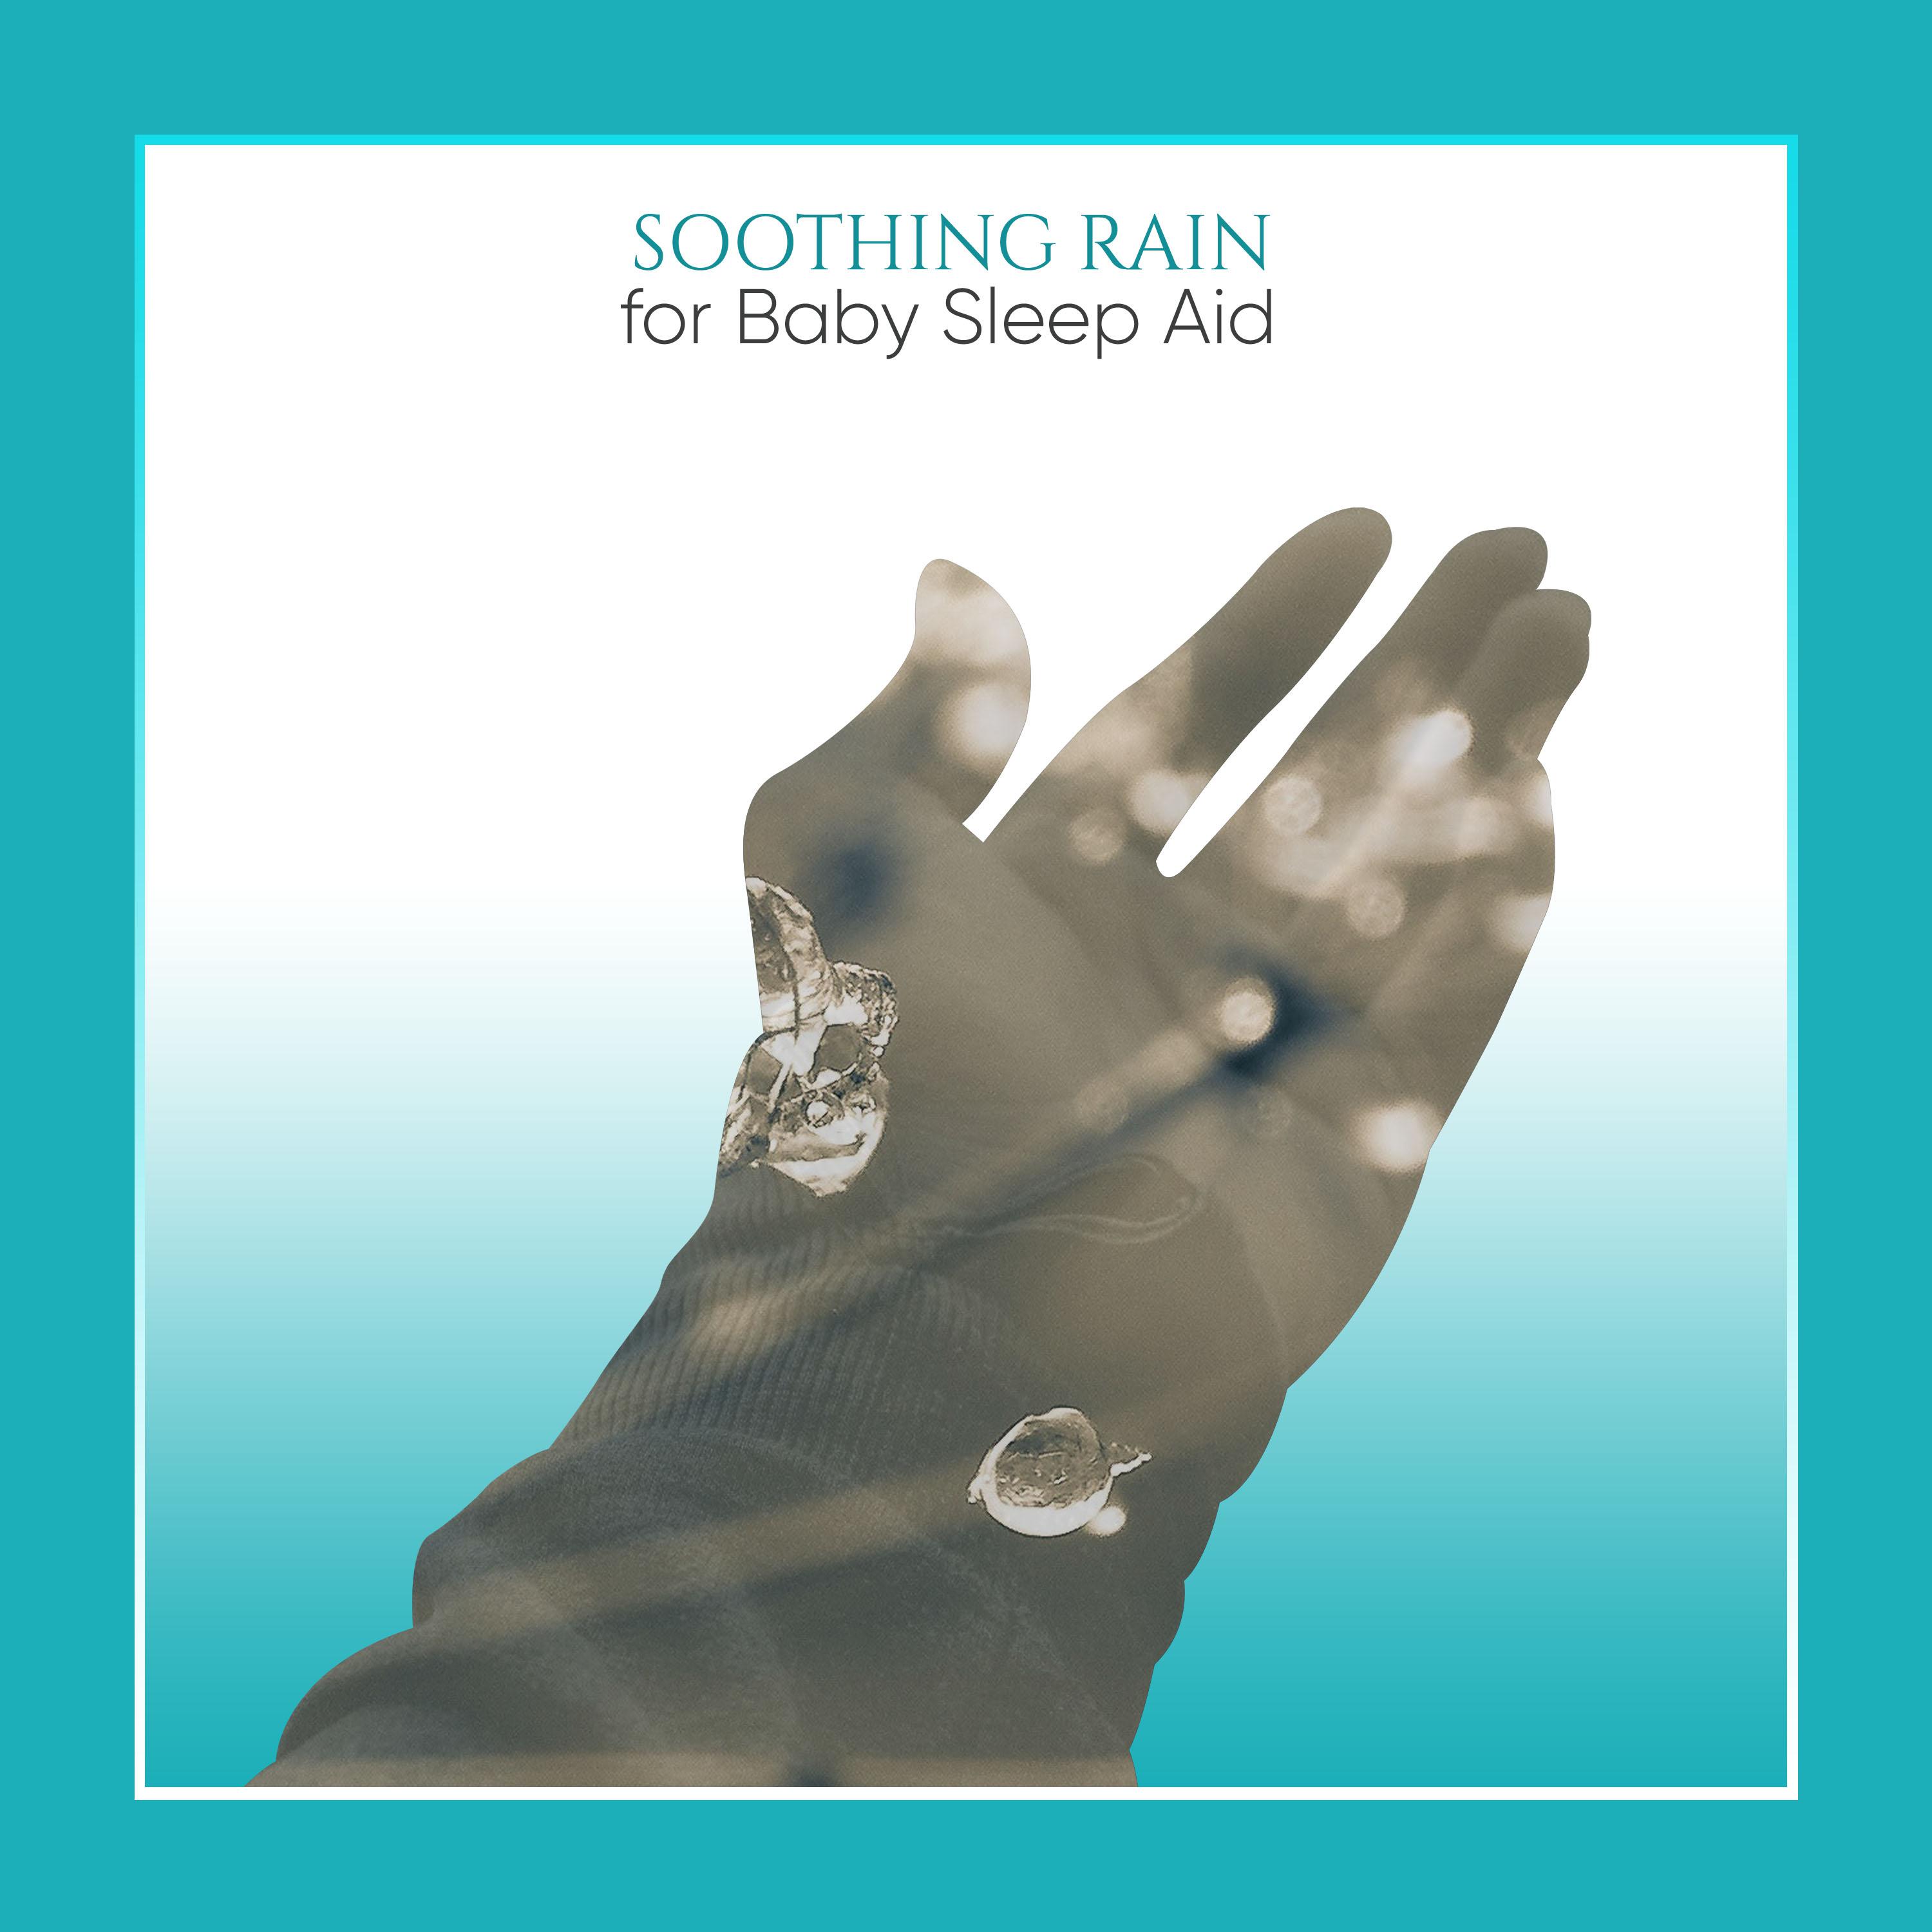 18 Soothing Rain Storms for Baby Sleep Aid